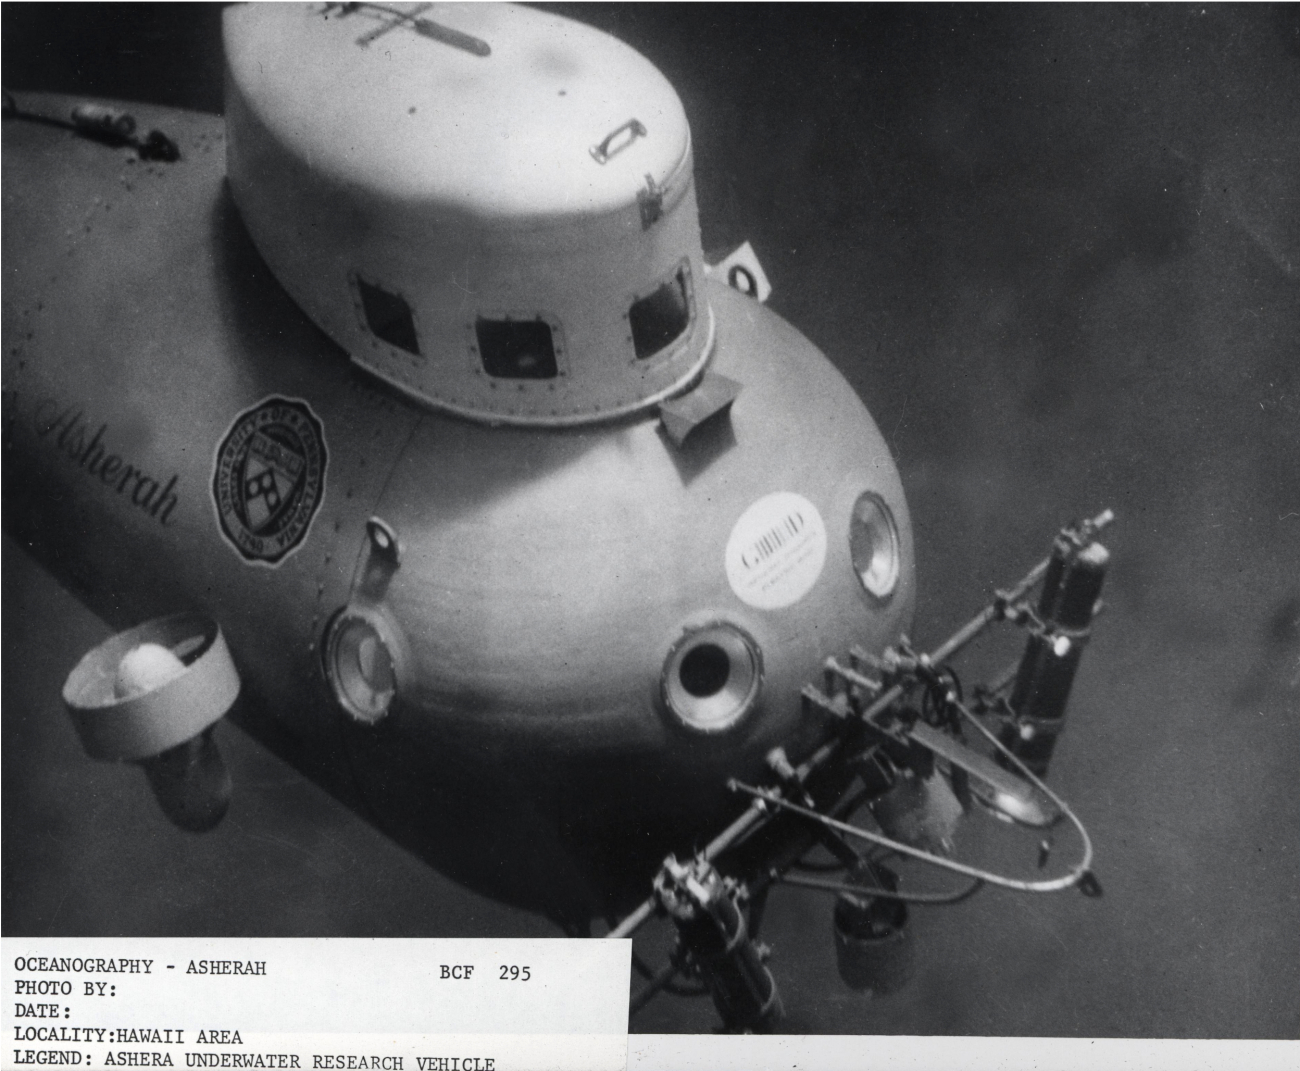 The submersible ASHERAH, a small two-man research vehicle operated bythe University of Pennsylvania Penn Museum between 1964 and 1969